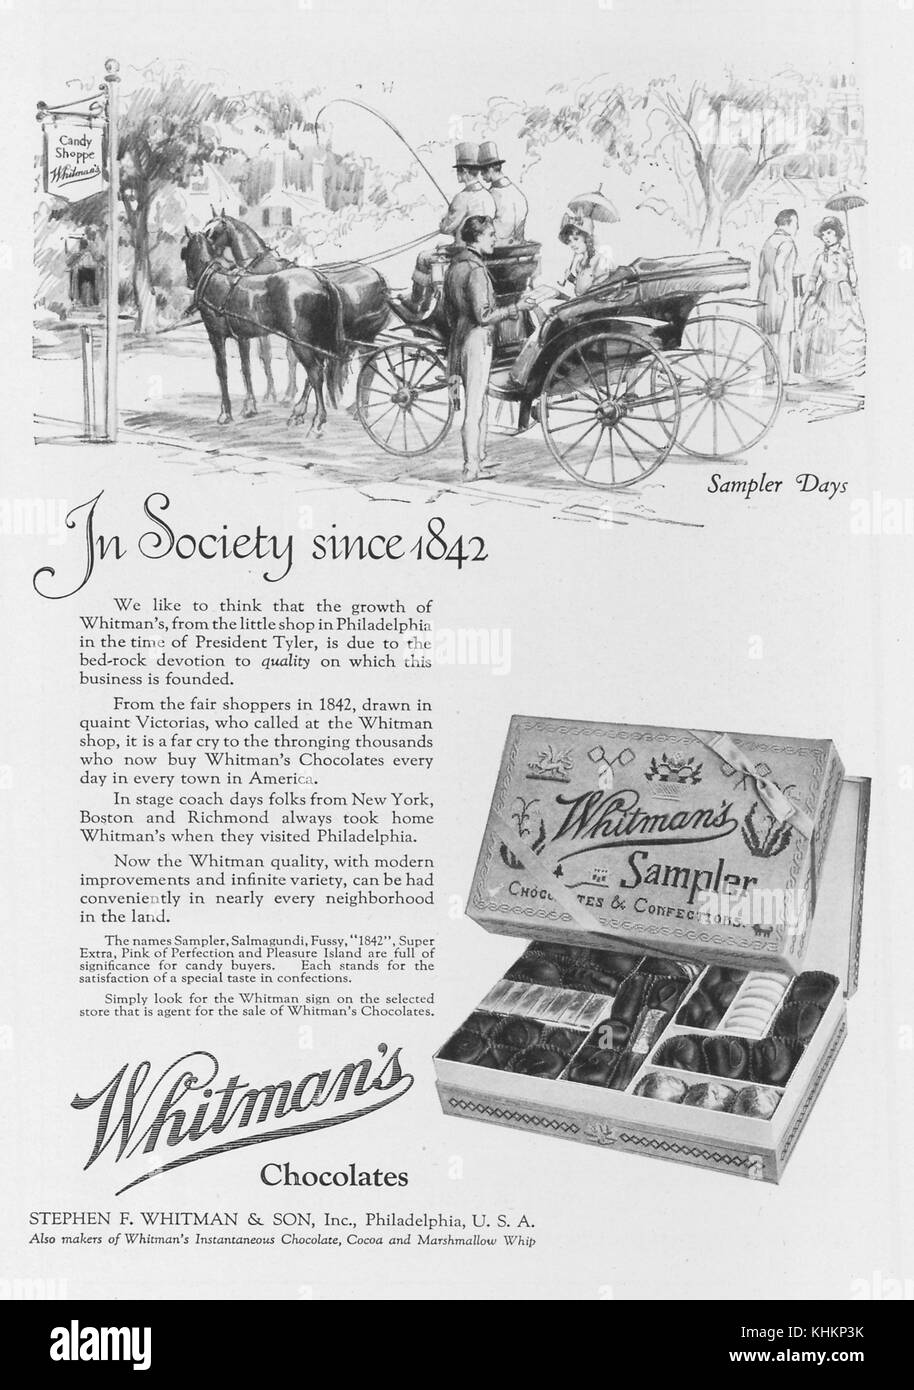 Full page advertisement for Whitman's Chocolates Sampler, titled In Society Since 1842, featured in National Geographic Magazine, Philadelphia, Pennsylvania, July, 1922. Stock Photo